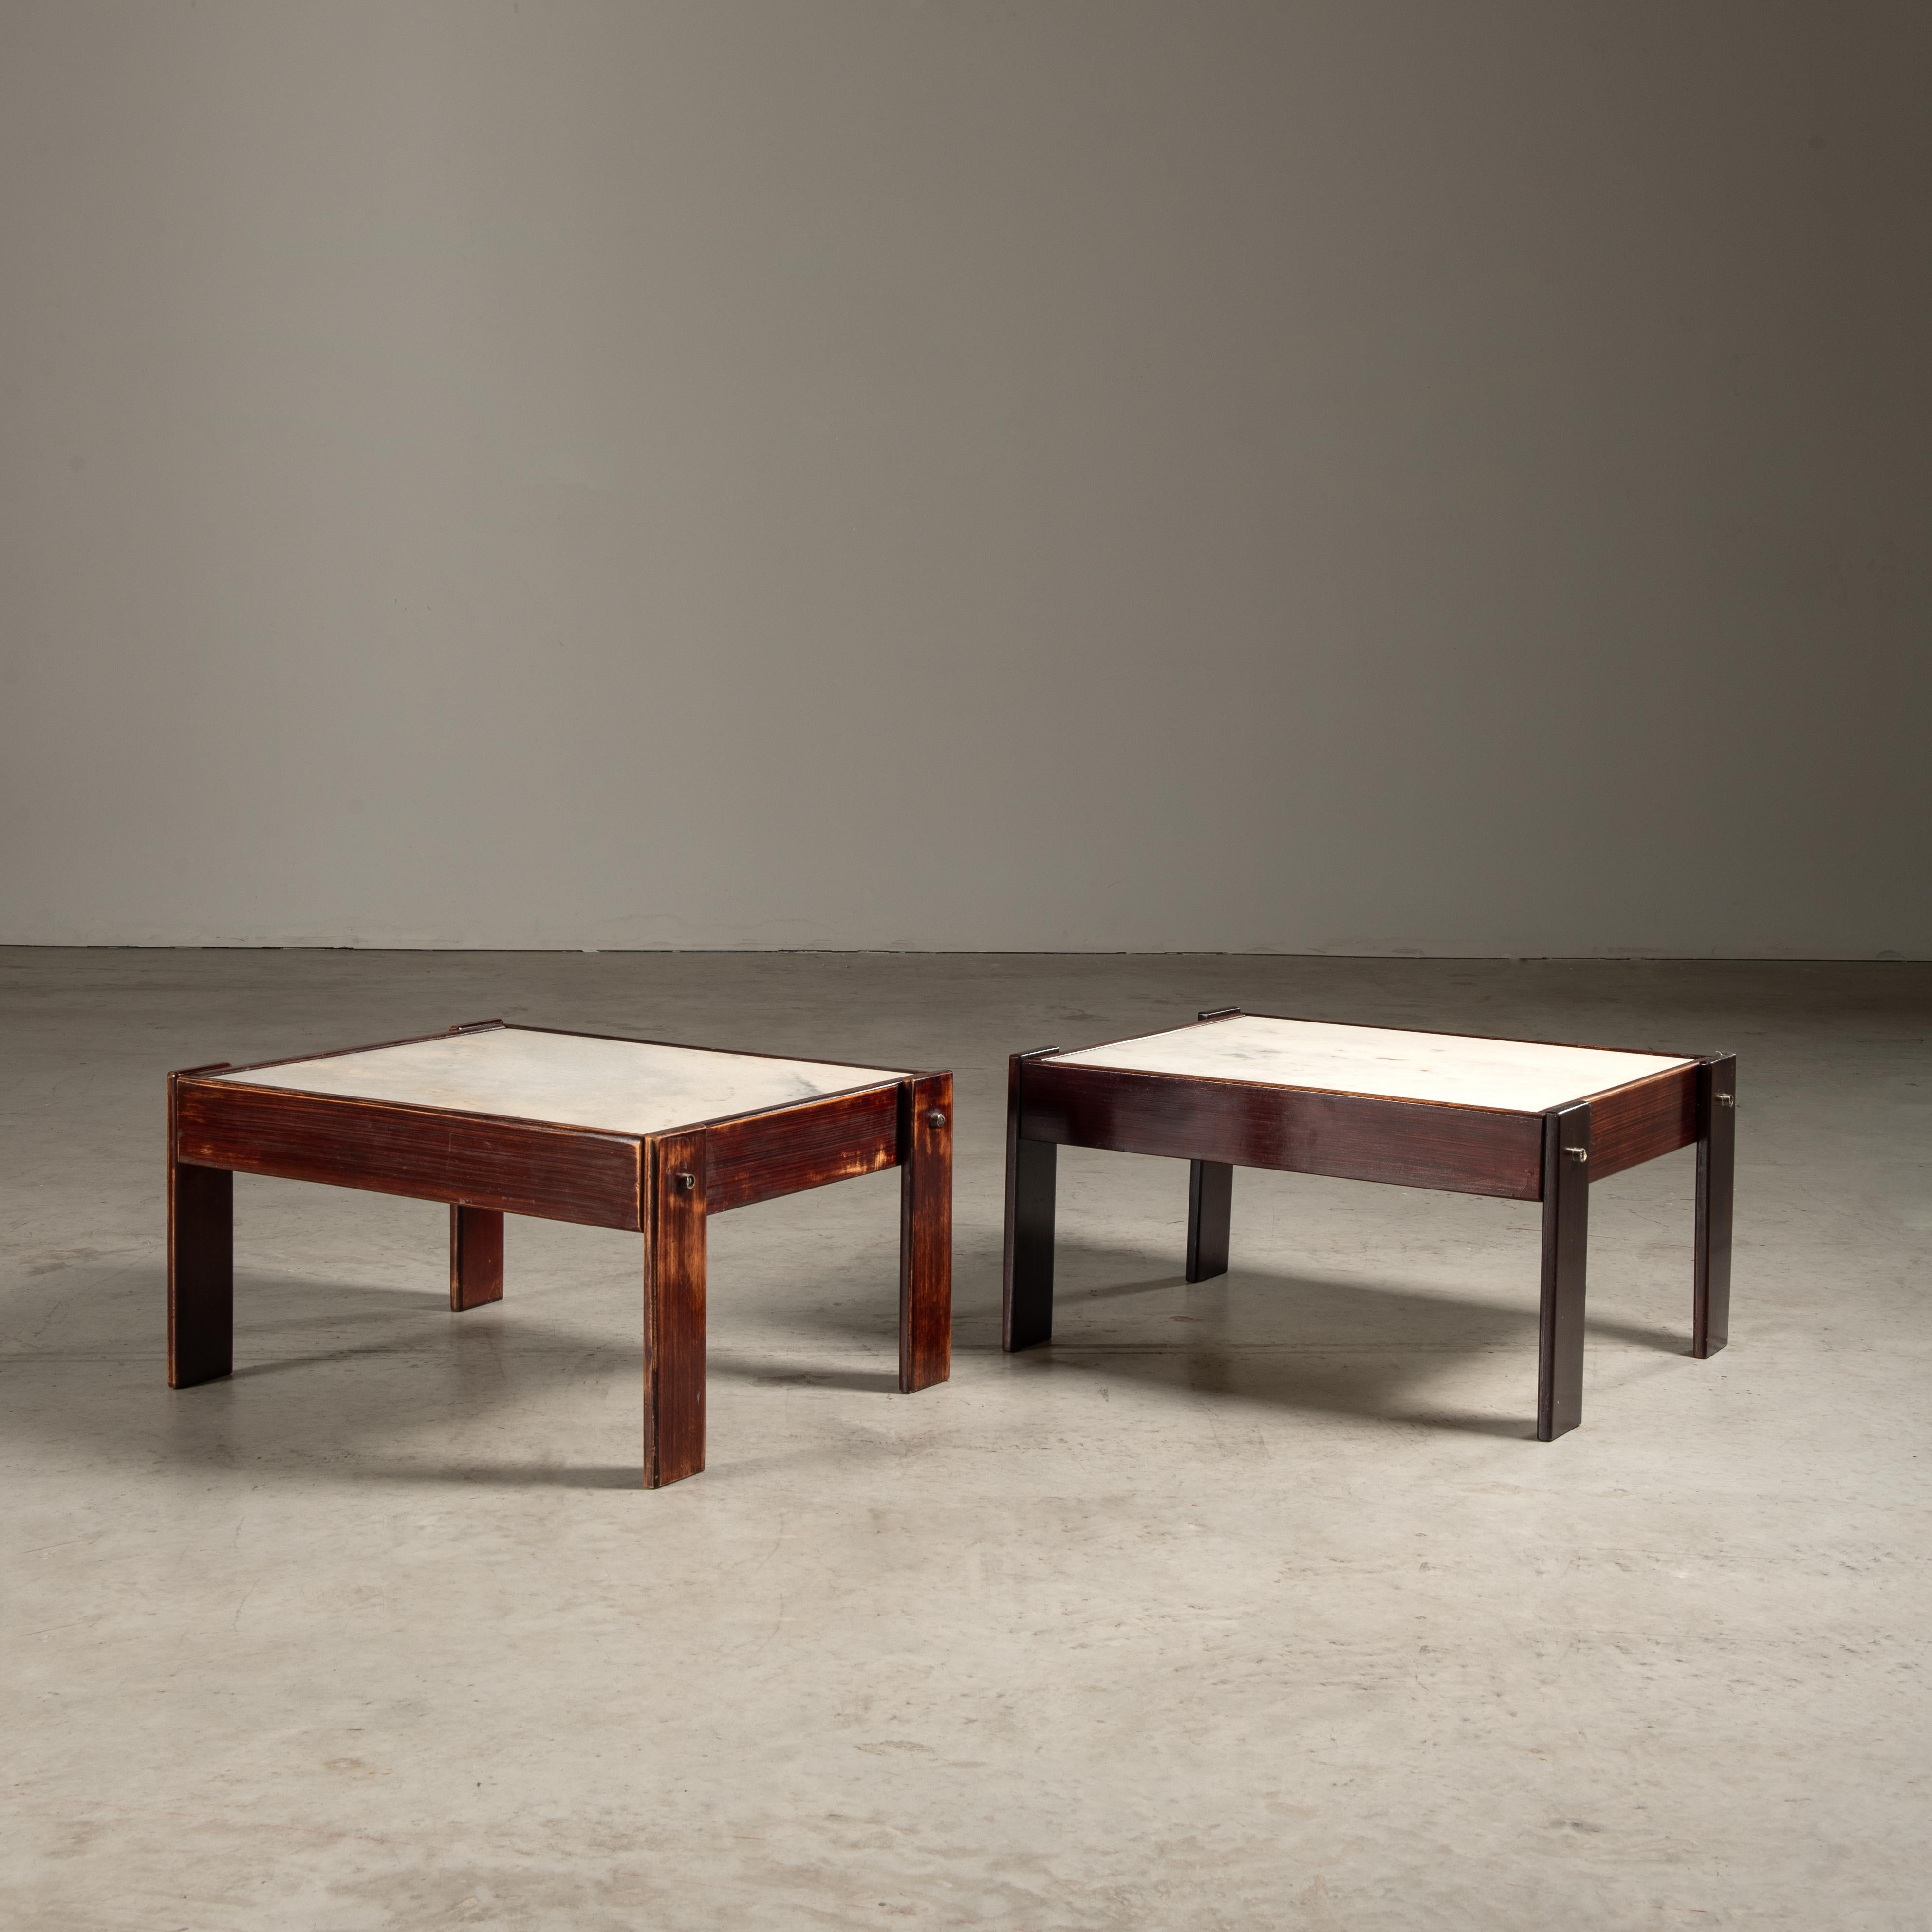 This pair of MP-85 side tables embodies the essential qualities of mid-century modern Brazilian design, a period known for its innovative use of materials and clean, geometric lines. Designed by the celebrated Percival Lafer, these tables are a